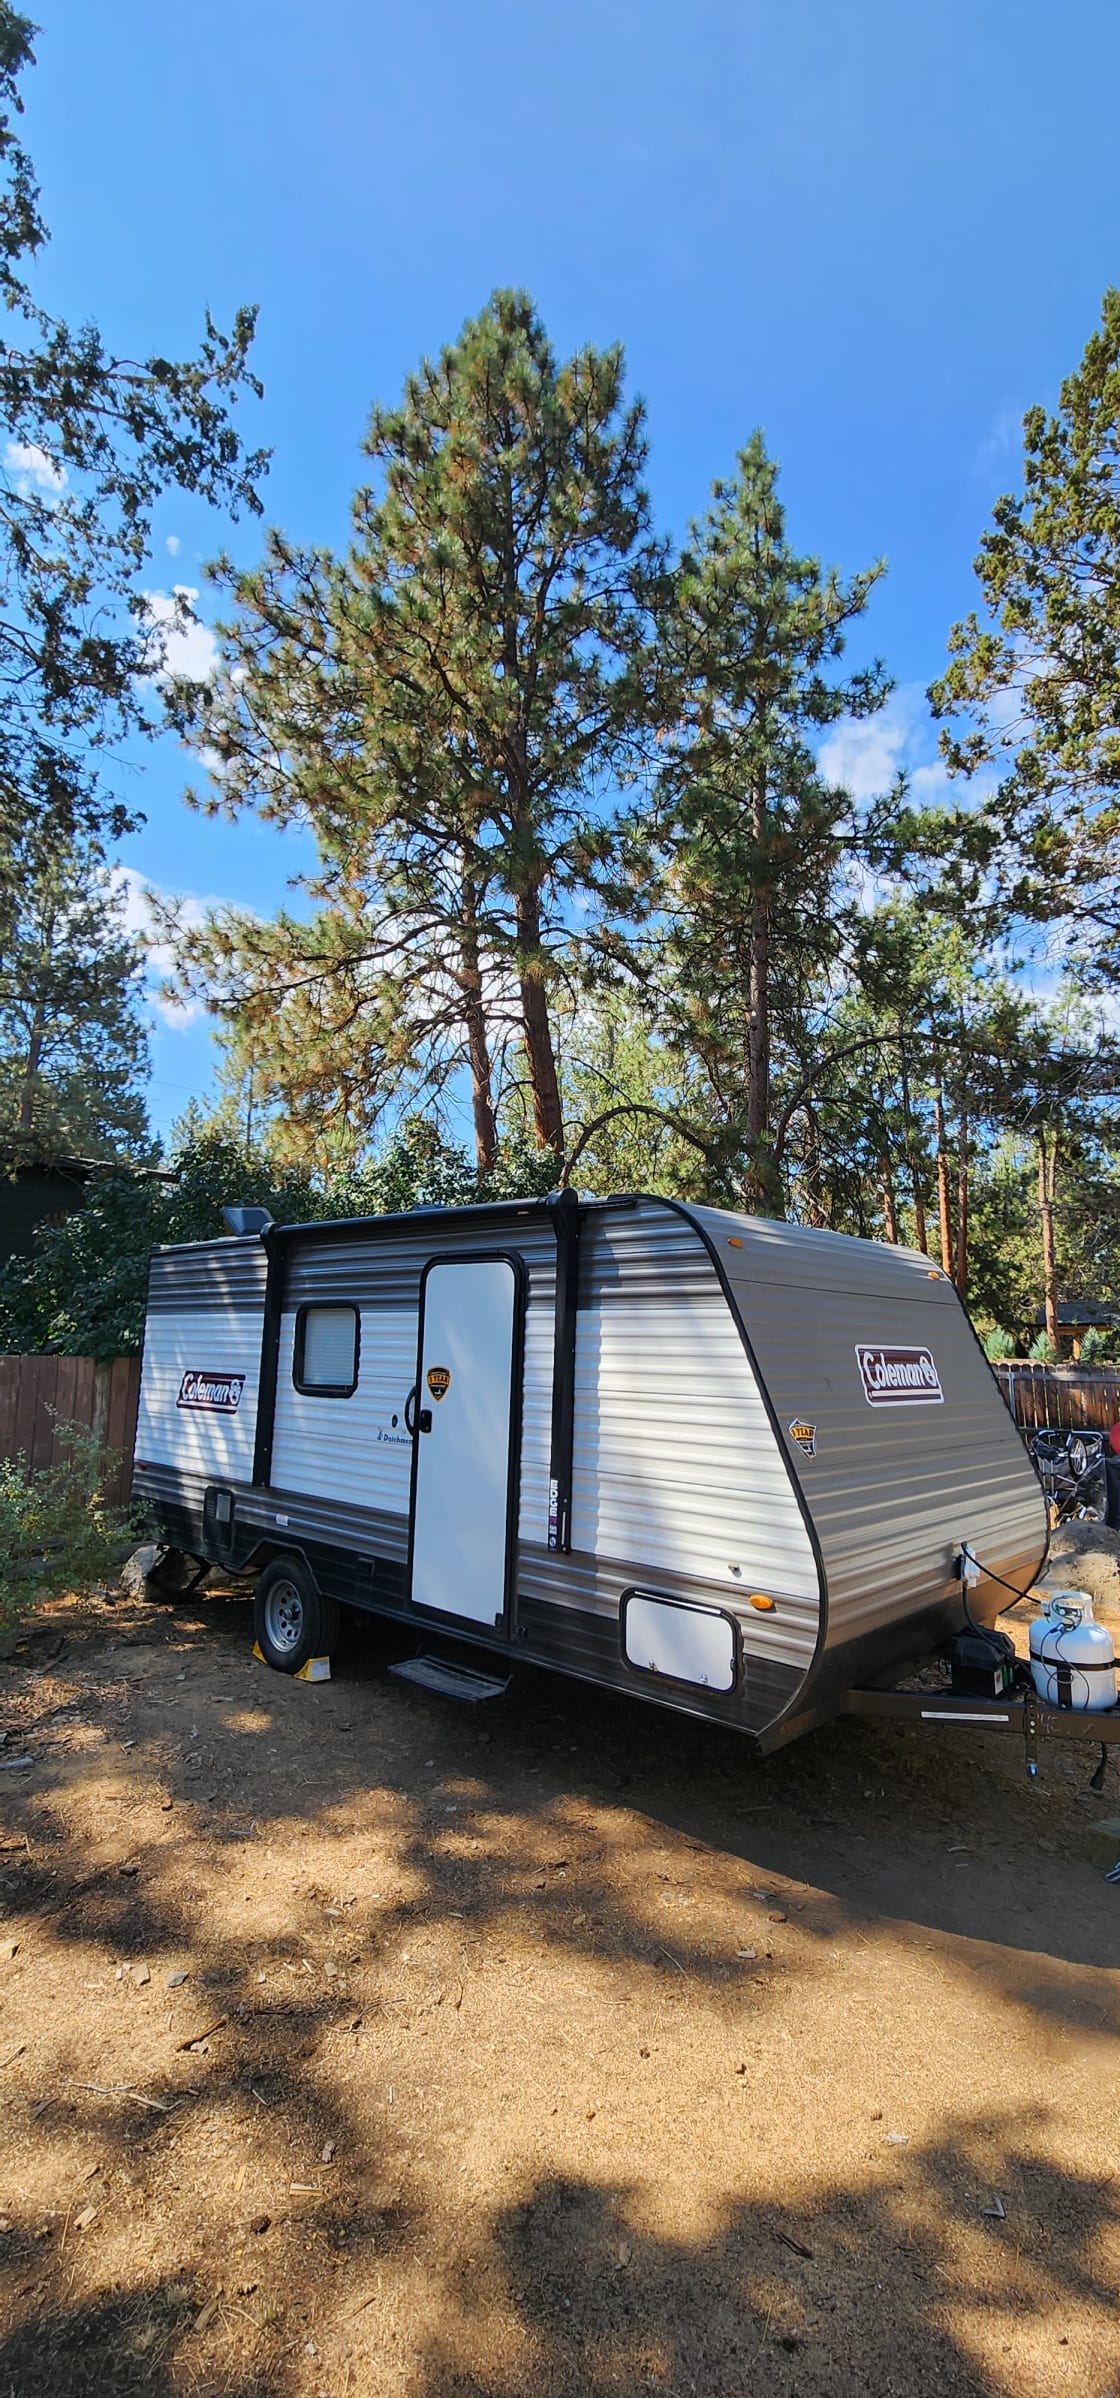 Camp Close to town, trails, river and more